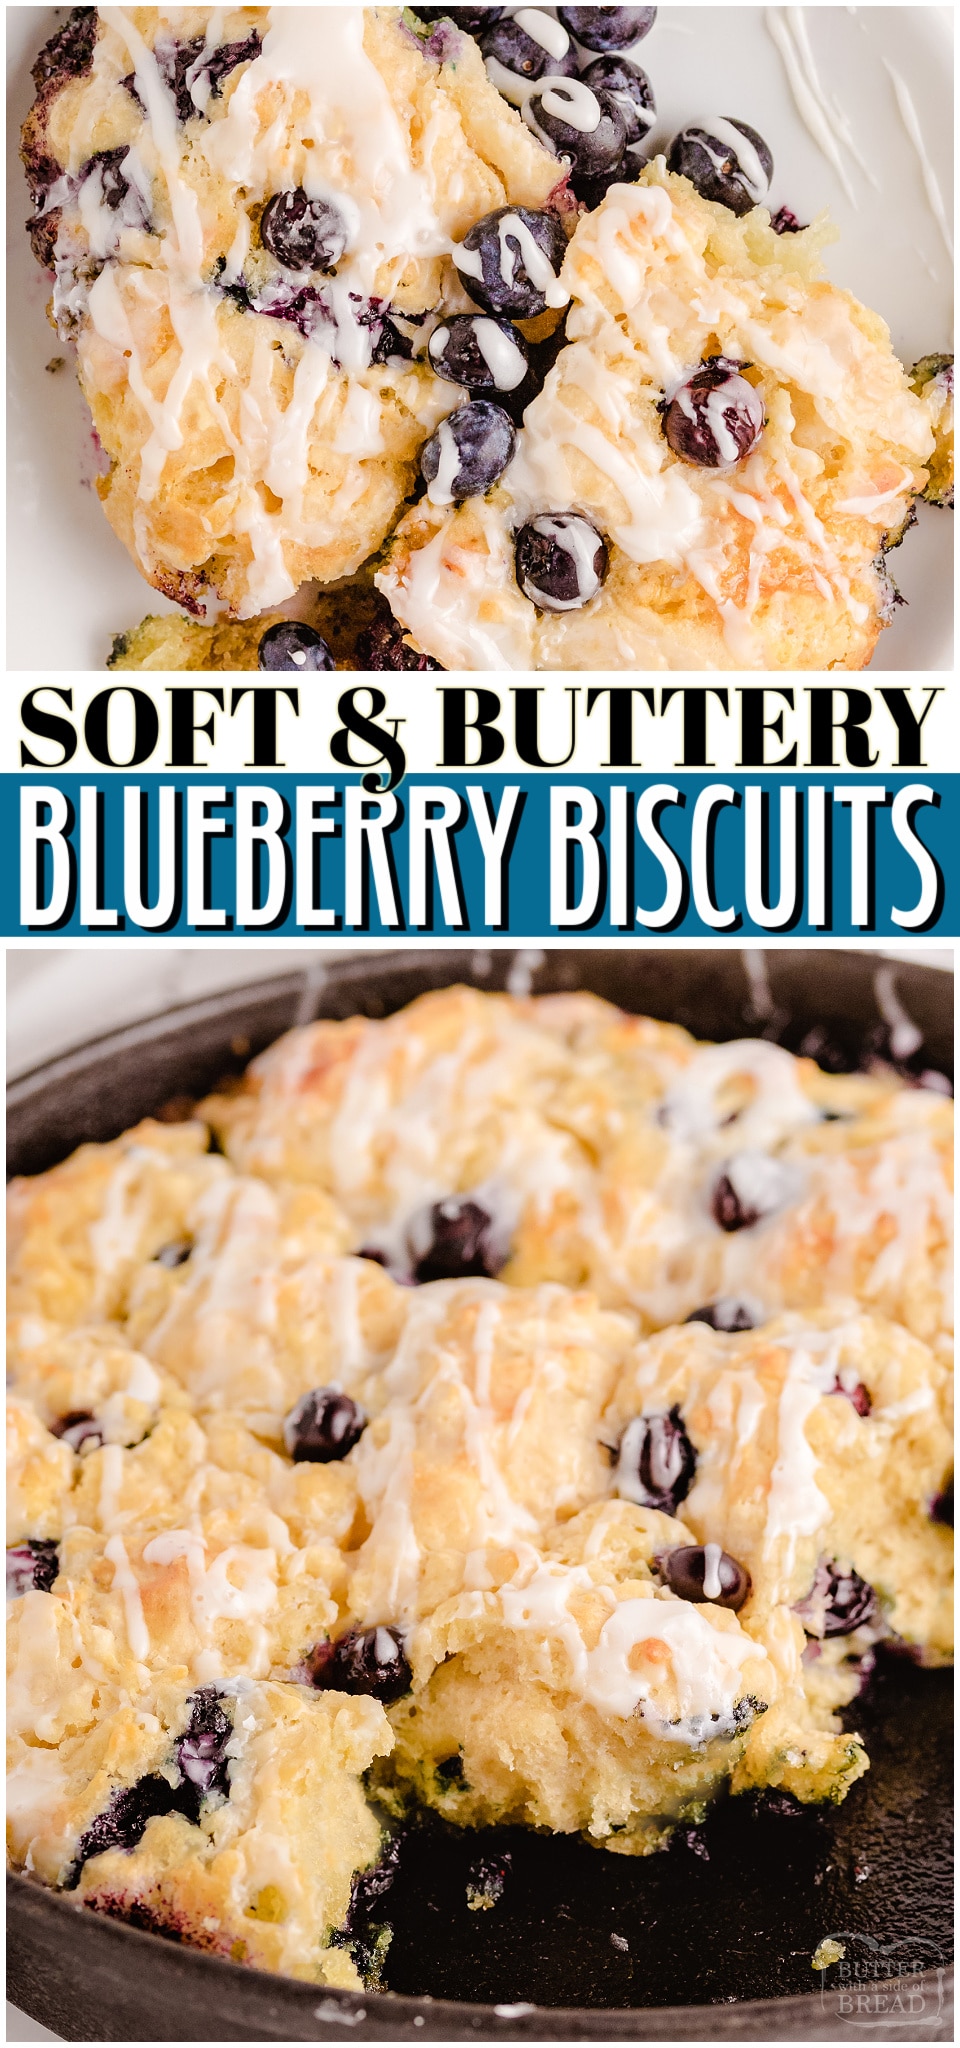 Blueberry Buttermilk Biscuits are soft and buttery and bursting with fresh blueberry flavor. Topped with an easy vanilla glaze, these sweet biscuits are perfect for breakfast or as a treat. One of my favorite biscuit recipes ever!